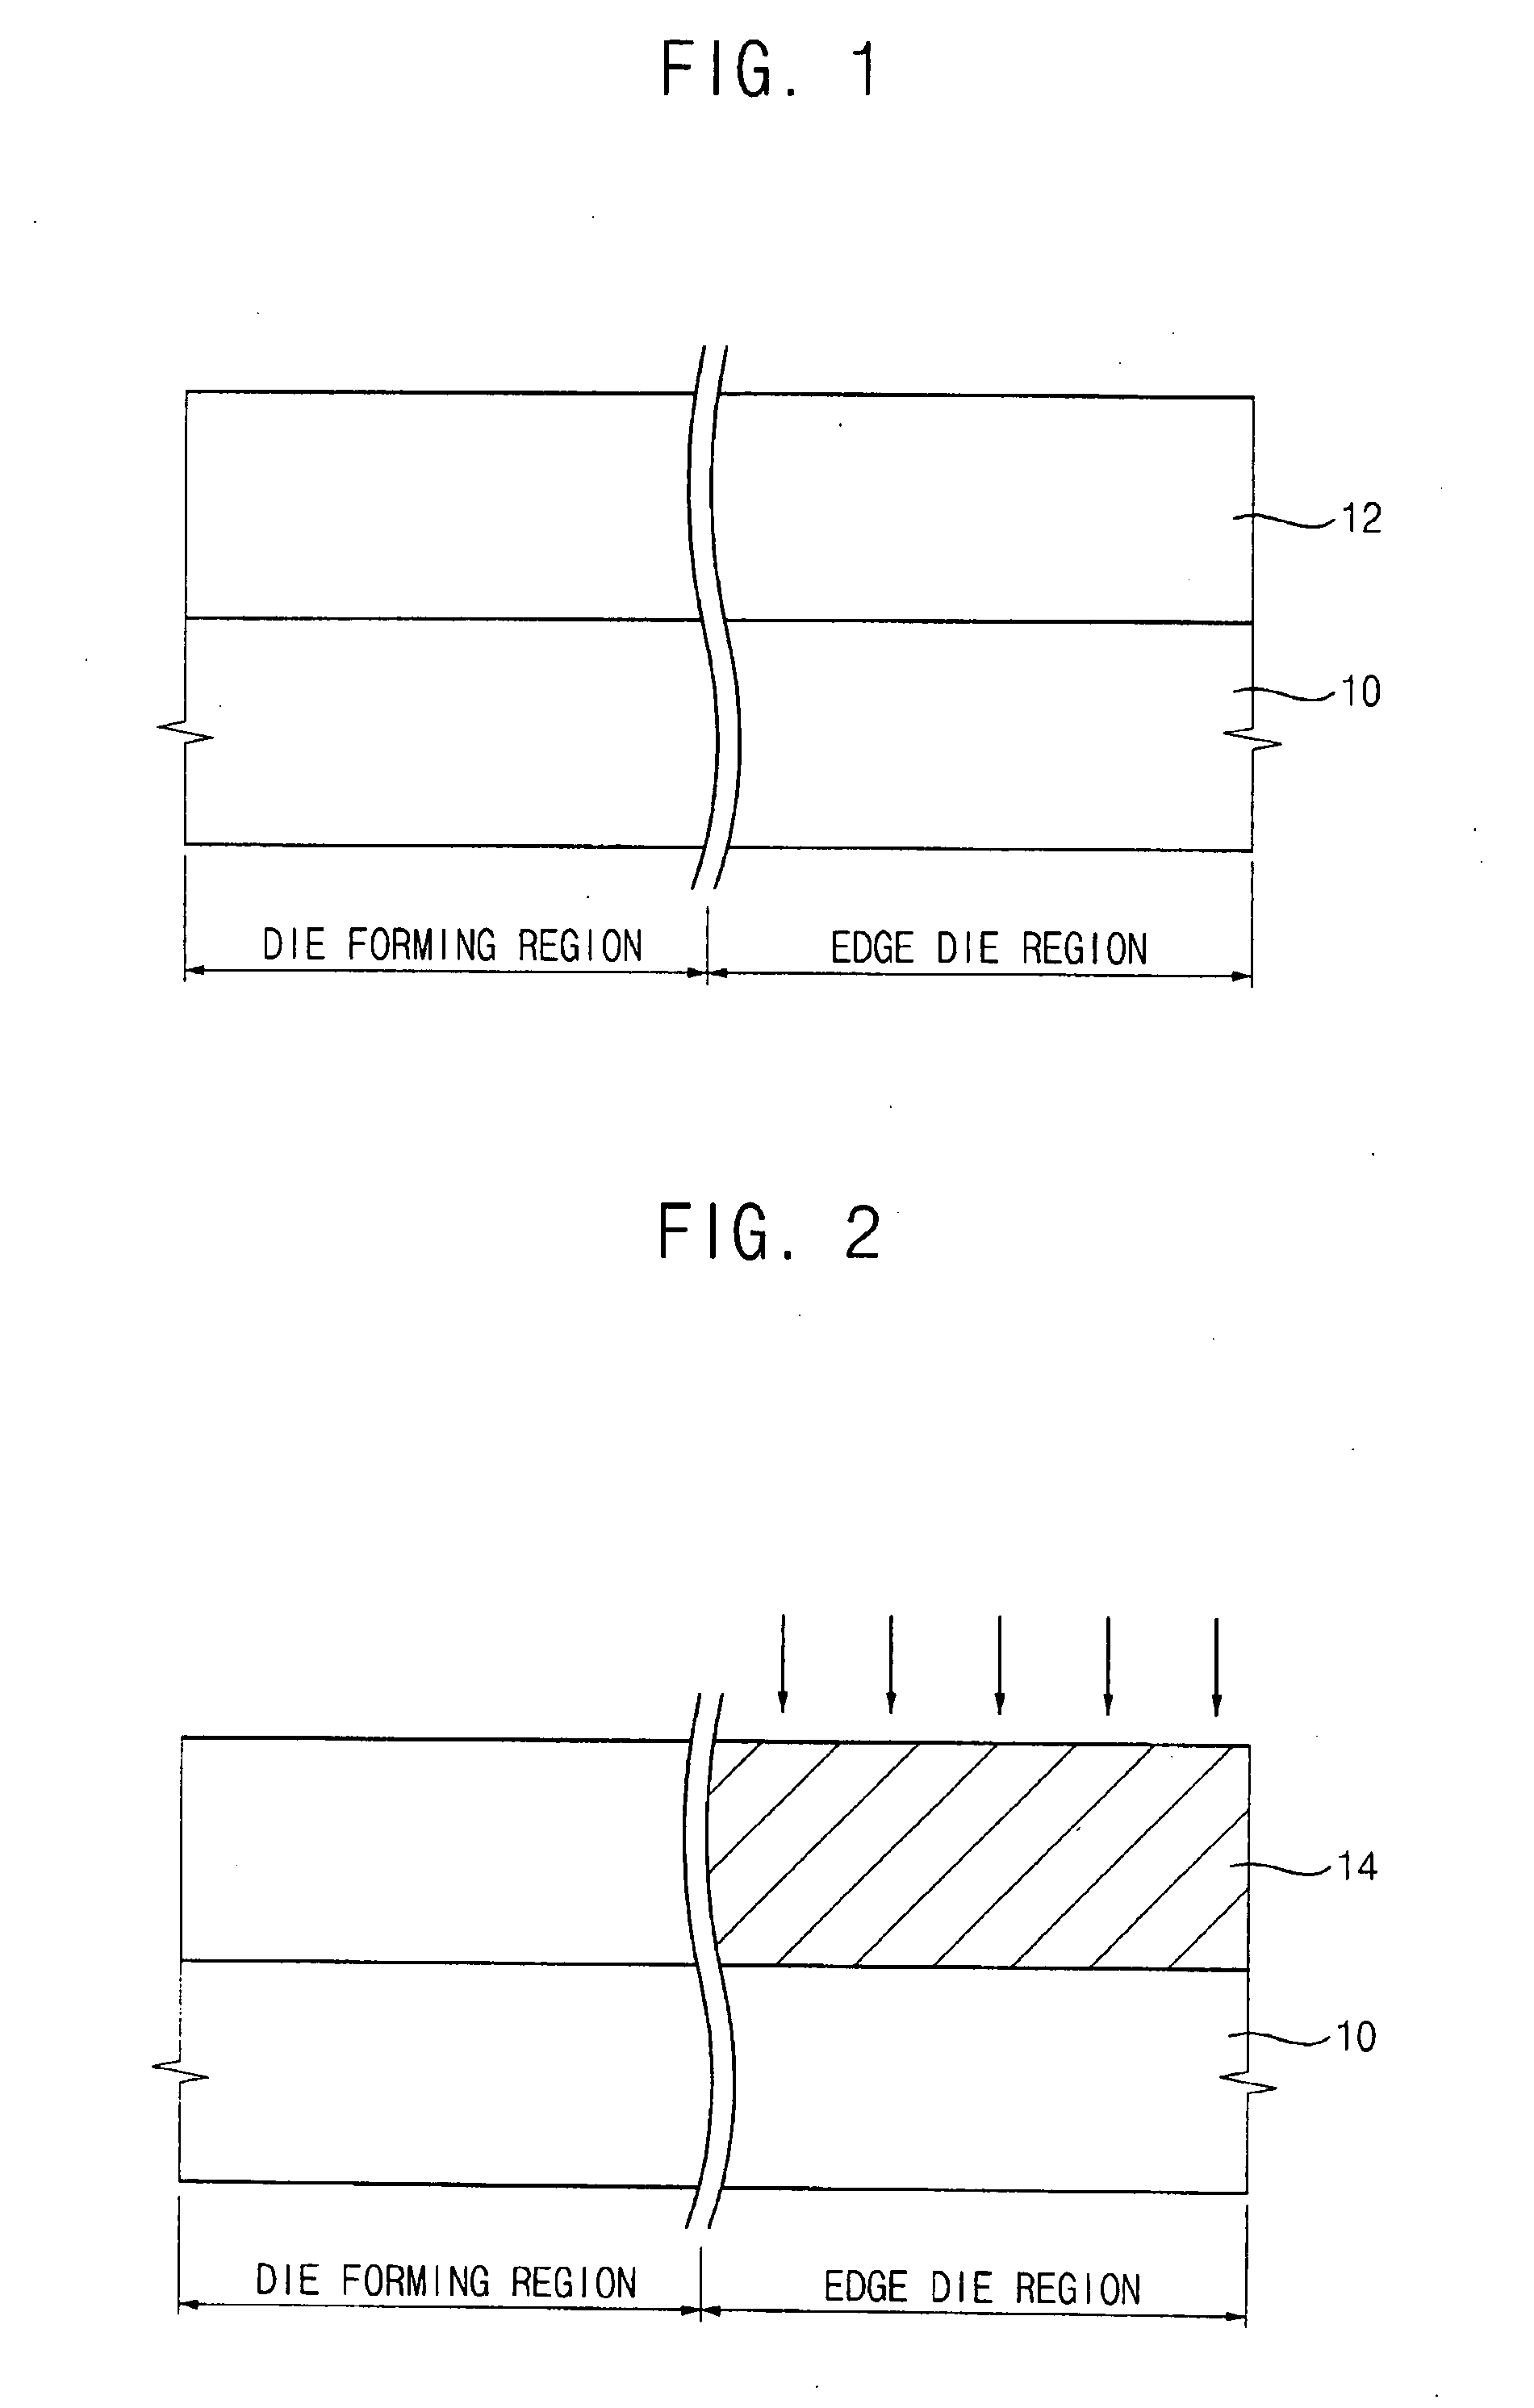 Polymer resin composition, related method for forming a pattern, and related method for fabricating a capacitor